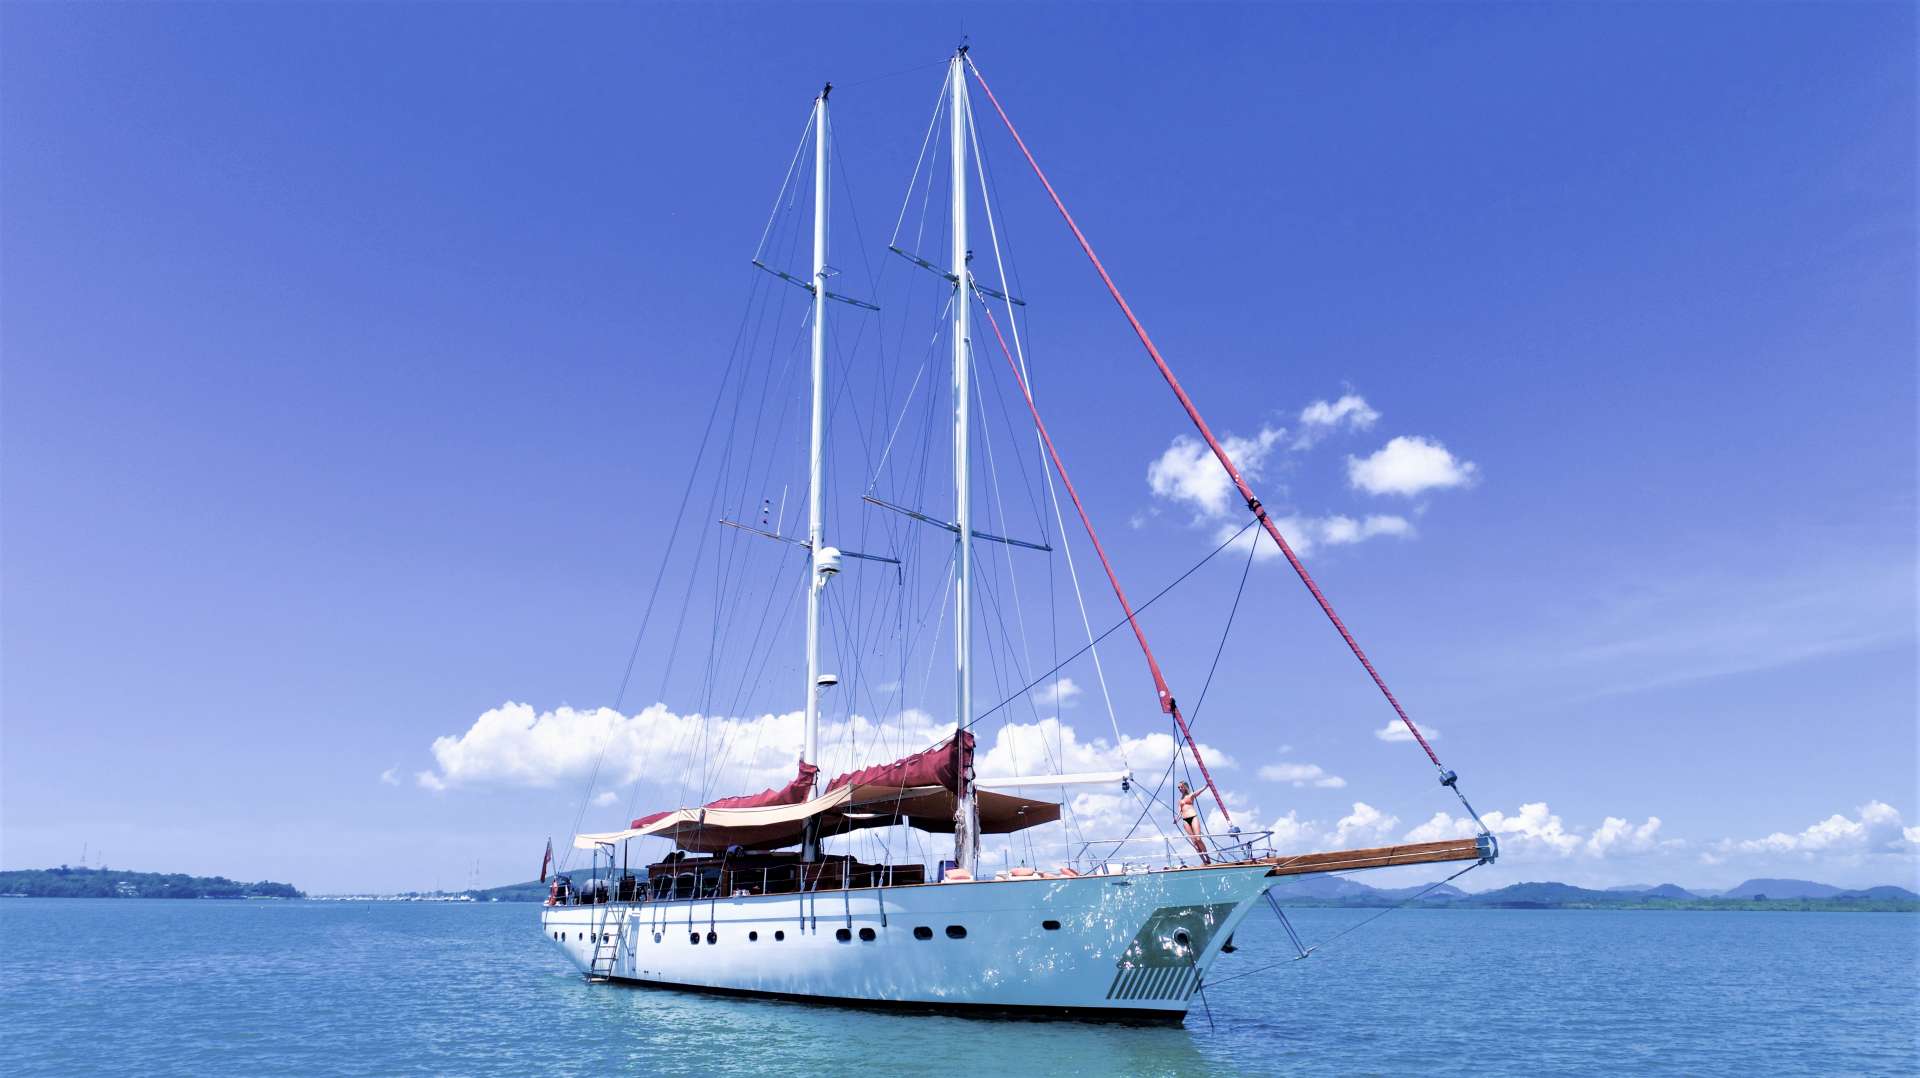 ORIENT PEARL is a custom-built luxurious sailing yacht, available  for charter in Southeast Asia.  Reminiscent of Turkish gulets, she has a wide beam, providing tremendous deck space and a generous cabin lay-out. She offers accommodation for 10 guests in five en-suite cabins, including a large, full-beam master suite, 2 double and two large twin cabins. 
The large salon receives plenty of natural light, and separates guest accommodation and crew quarters.  Comfortable sofas provide seating around a dining table. Nearby are refreshment facilities, including a coffee machine and a wine refrigerator.
The interior has oriental touches and features mahogany throughout.
The aft deck has a dining table that can seat 10 guests, as well as a bar.  On the large foredeck is another seating area around a low table and various deck chairs and sun pads. Removable awnings can be put up to provide shade whenever required.

ORIENT PEARL's Chef serves the best of delicious and healthy Thai and Asian cuisine, including fresh fish, and seafood bought directly from local fisherman.

Charter locations include Phuket - Thailand, Langkawi - Malaysia, the Mergui Archipelago - Myanmar (Burma) and from May/June to October the remote, unspoiled Anambas Islands of Indonesia. 
